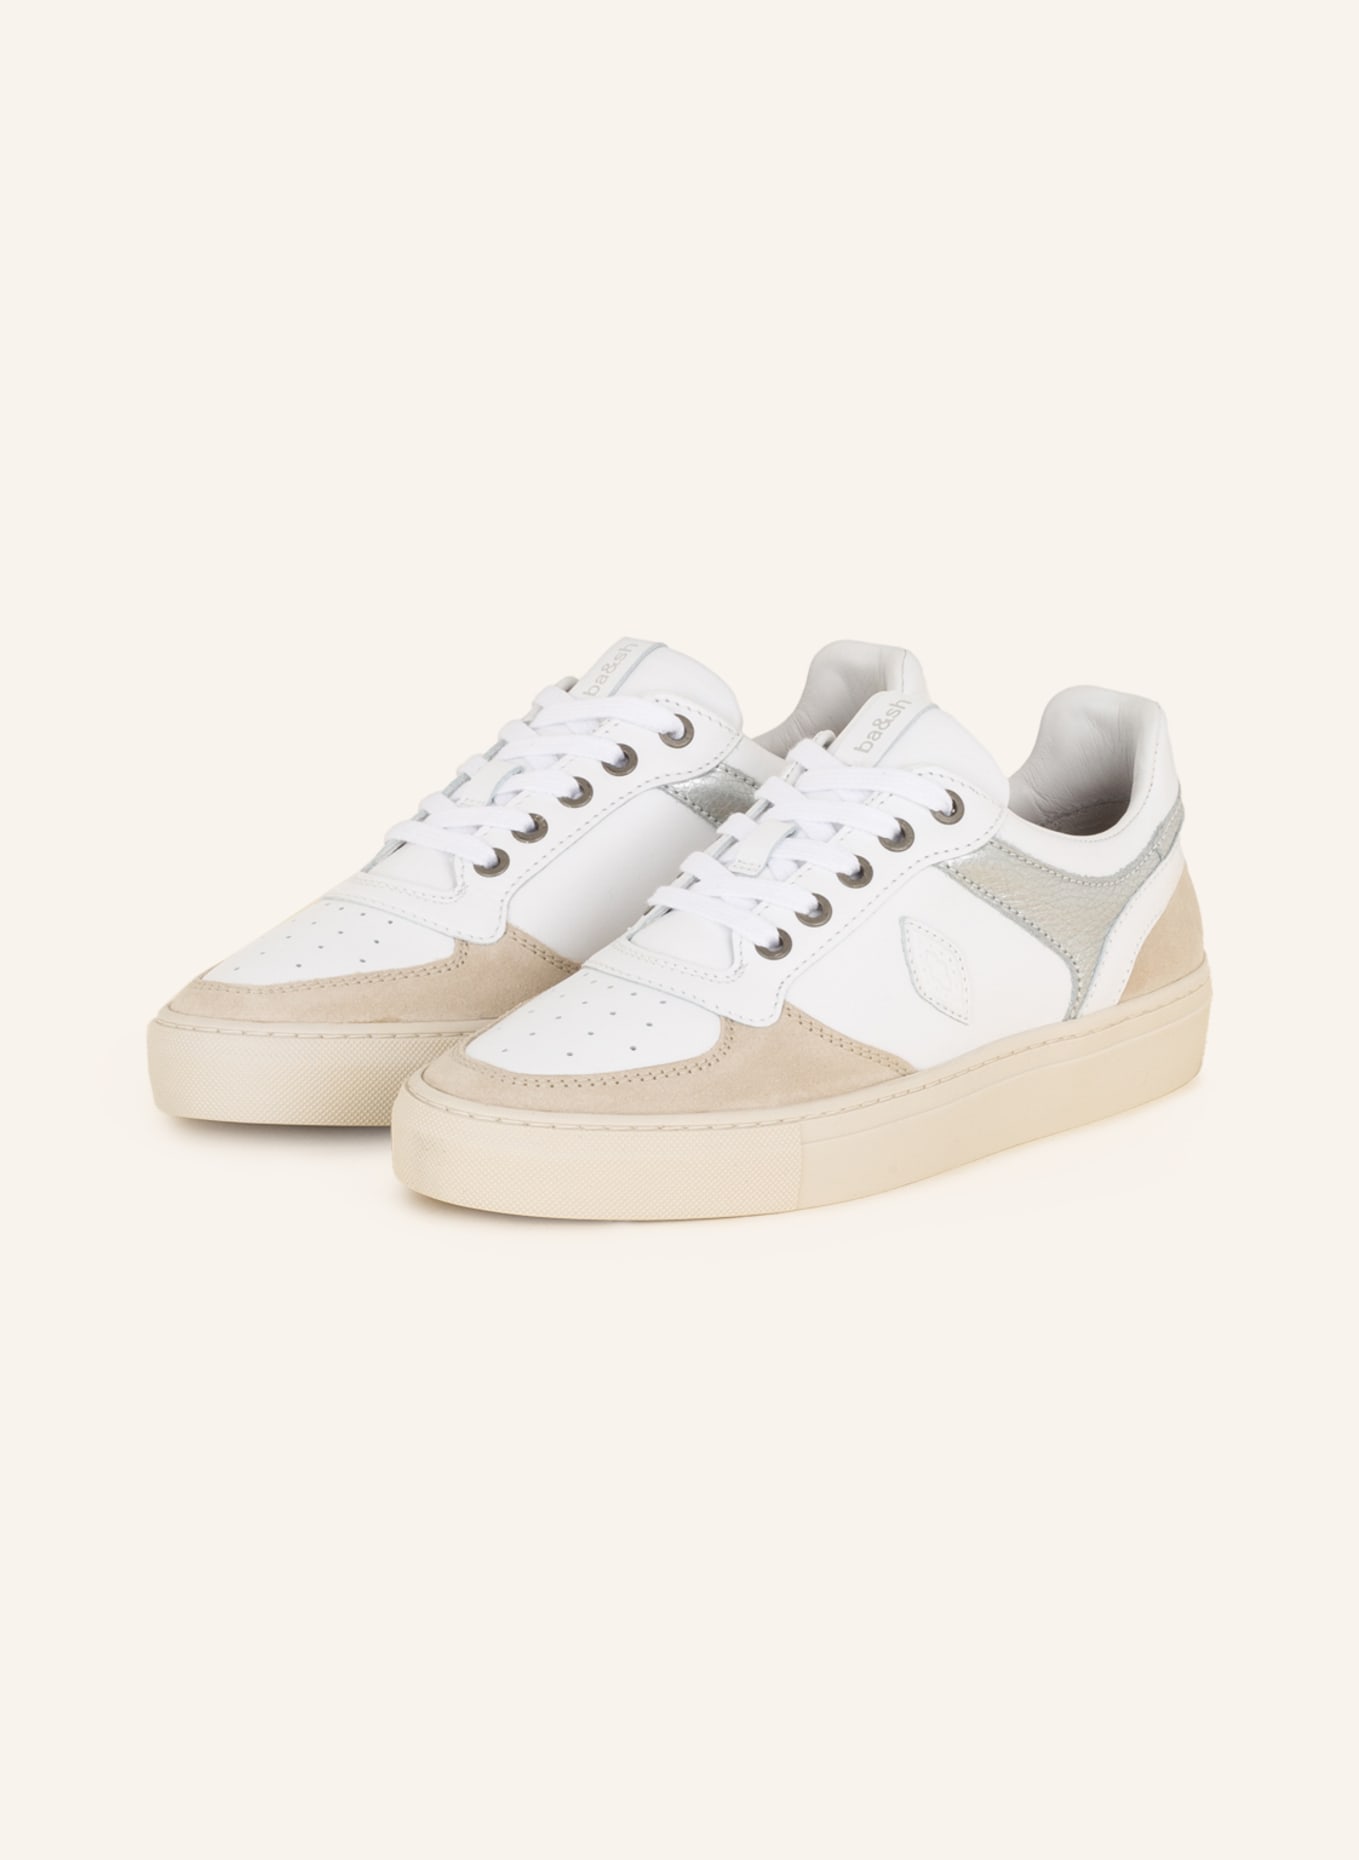 leather high-top sneakers CRUSH WHITE // ba&sh US